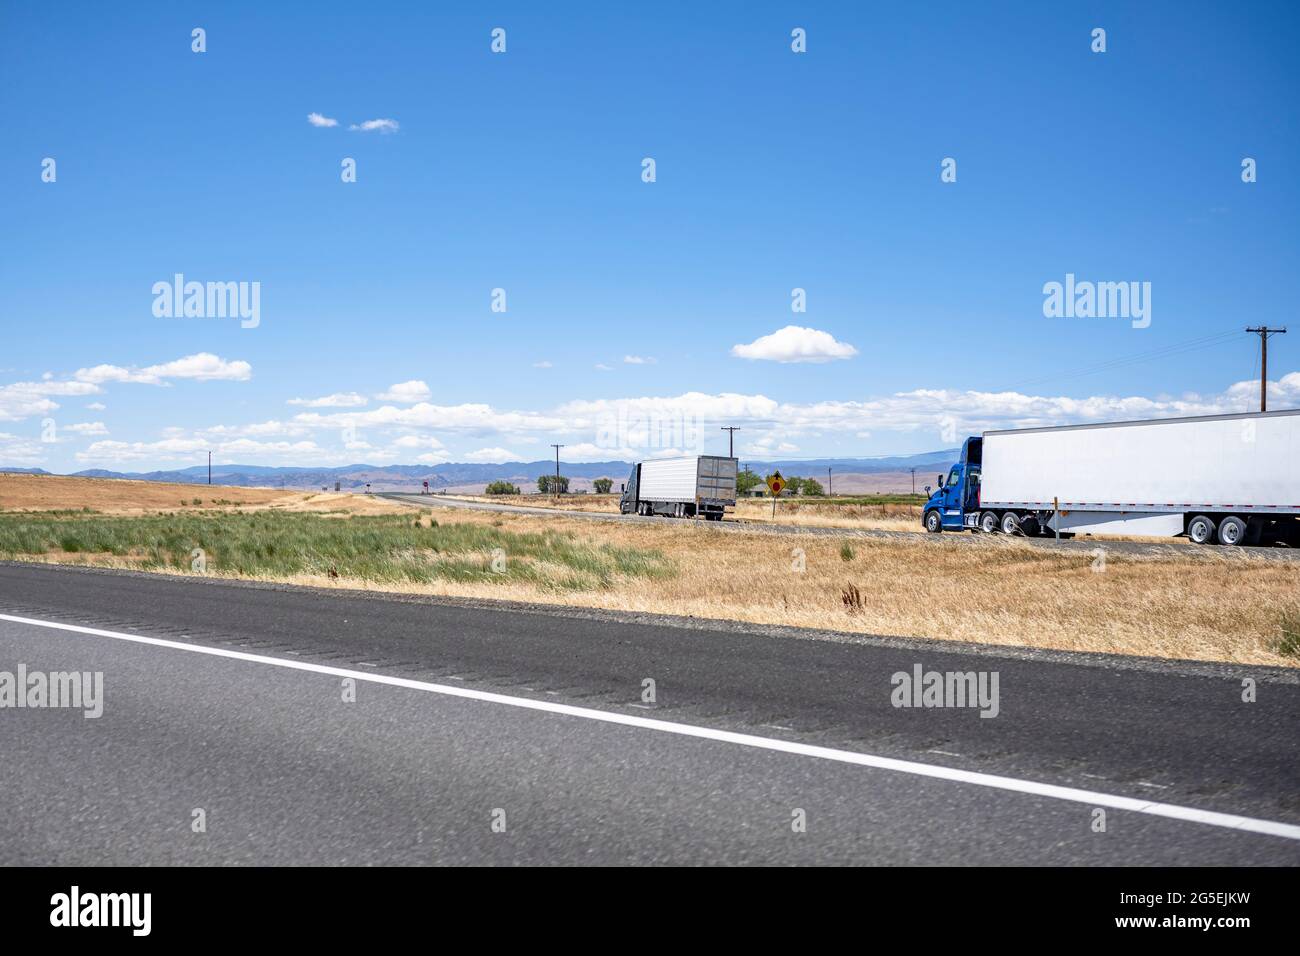 Group of big rigs semi trucks tractors caring cargo in different semi trailers standing on the shoulder of the highway exit intersection road take a b Stock Photo